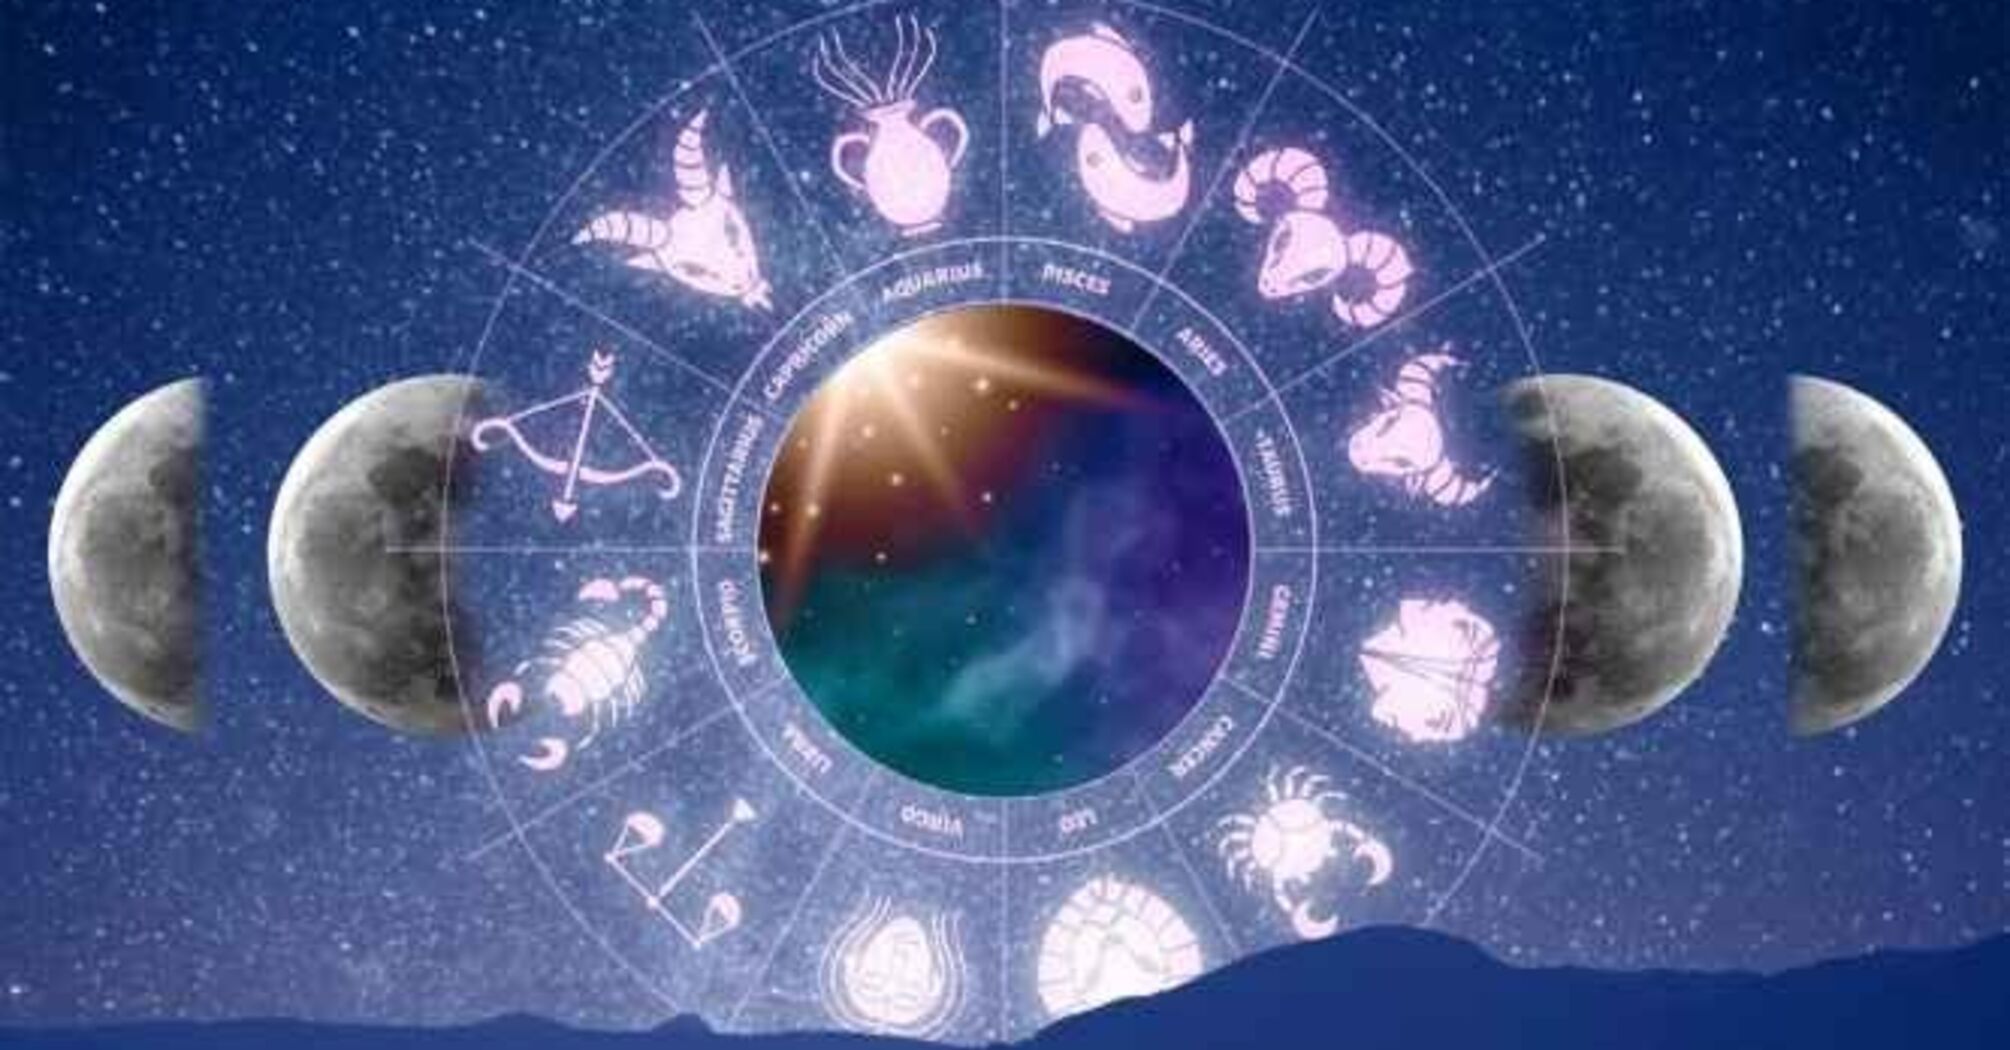 Some will have a surge of energy and excitement: Horoscope for all zodiac signs for January 31